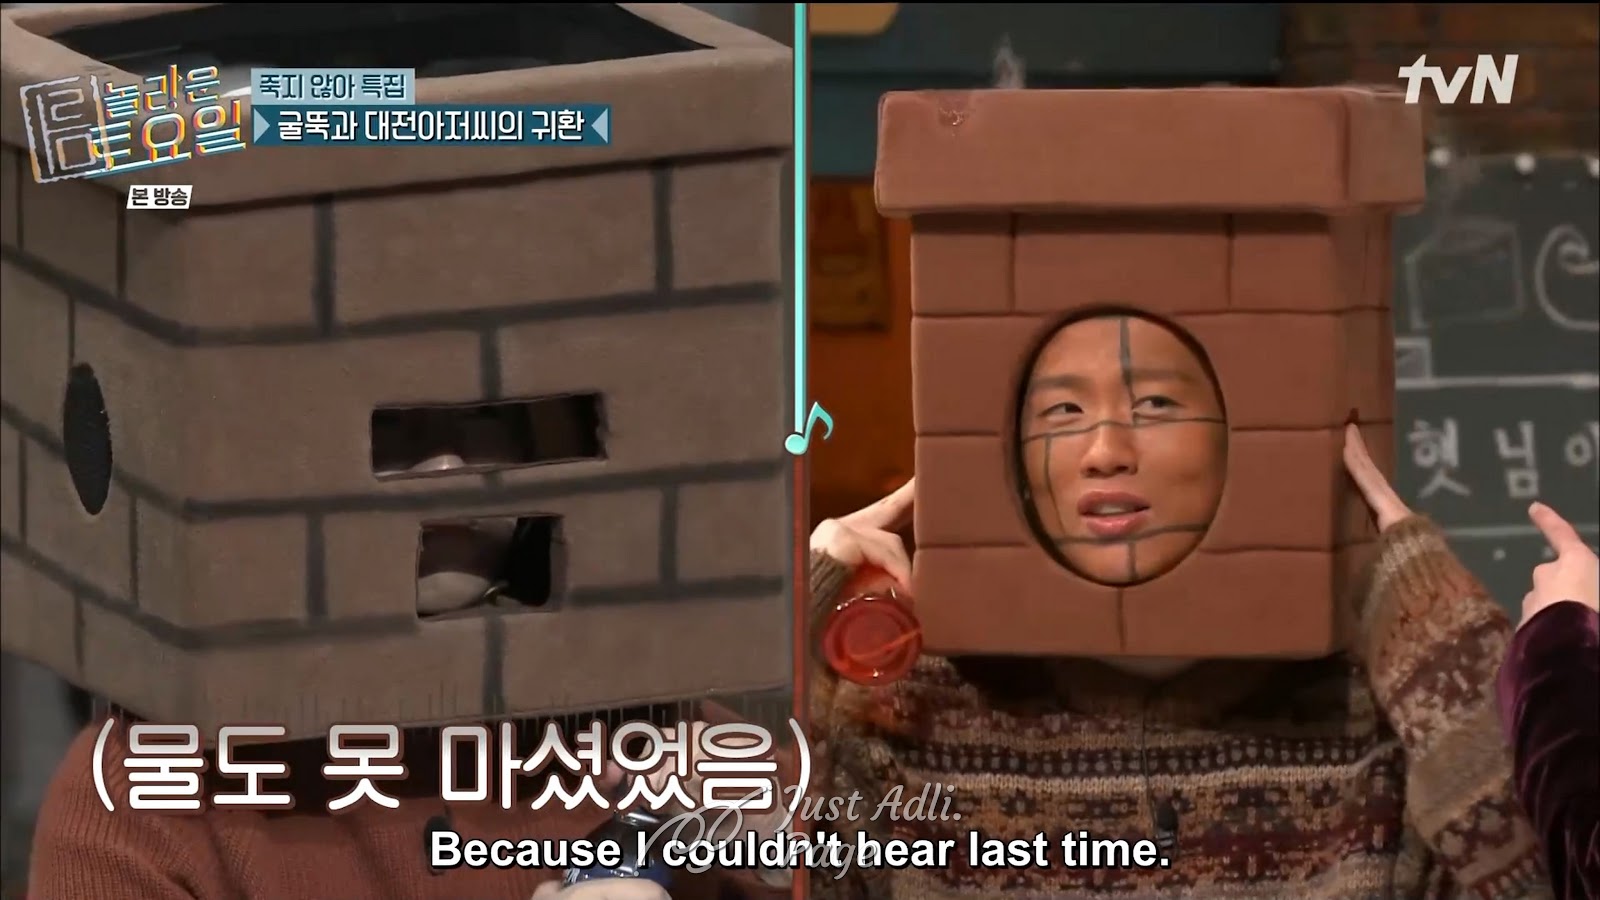 So, Hanhae will be able to hear clearly than before